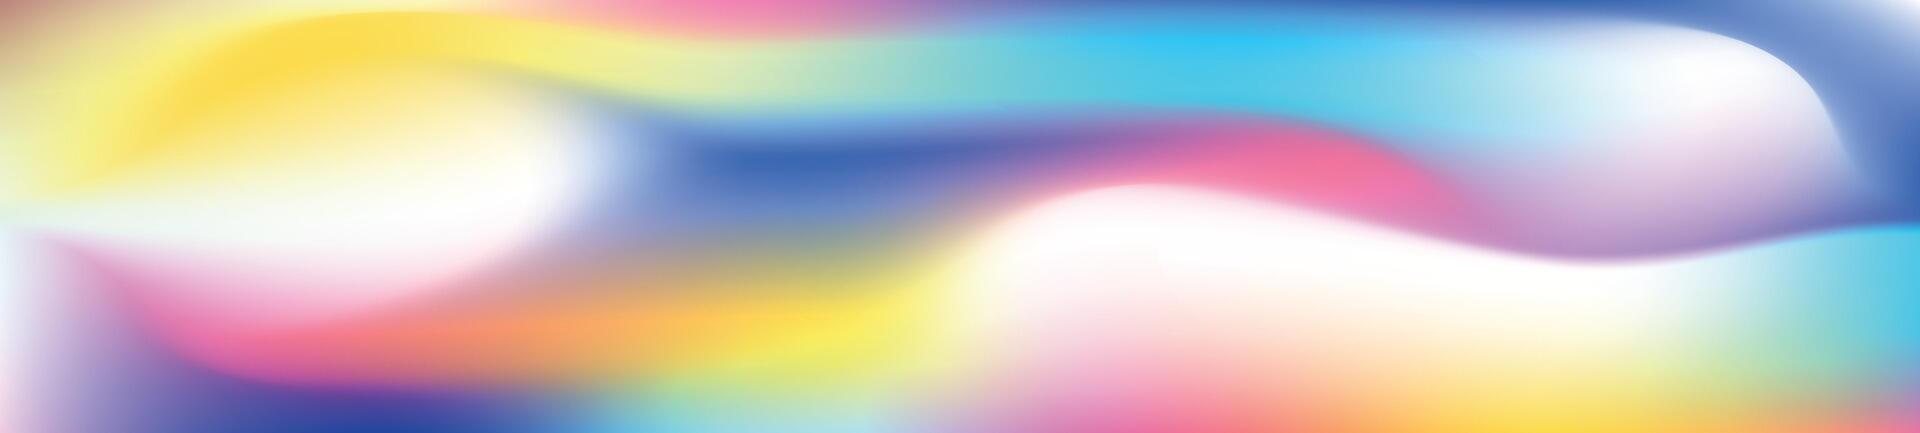 Y2K gradient background with pink, purple aura, glowing. Flat vector illustration isolated on white.